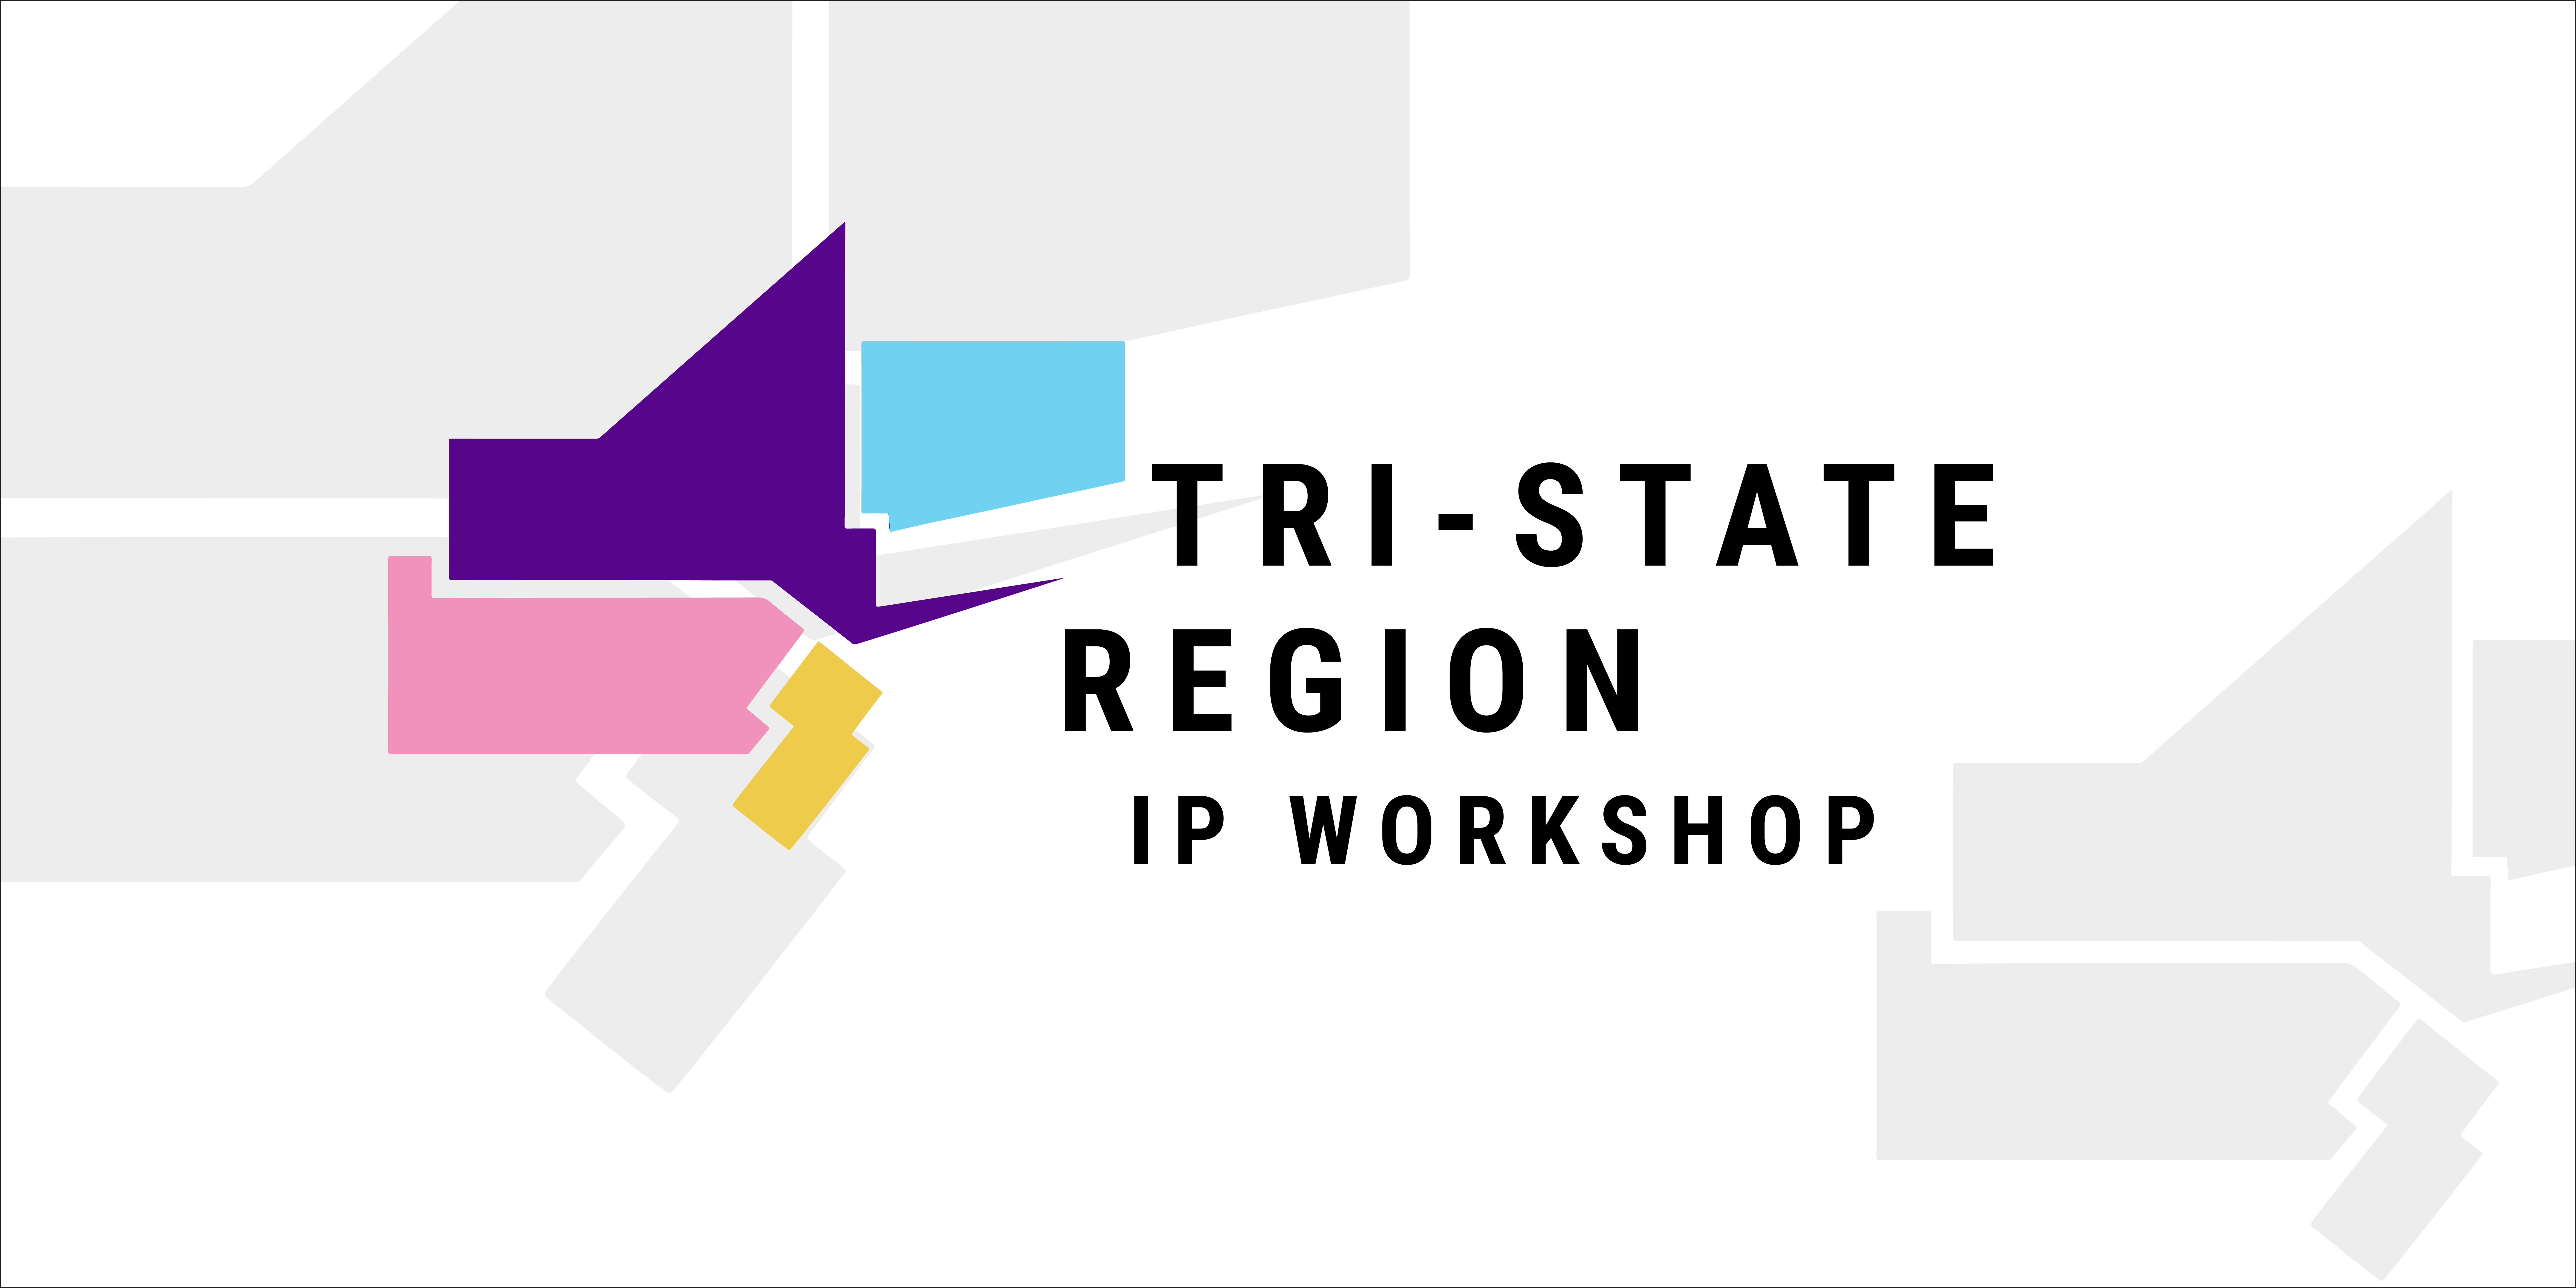 The words 'Tri-State Region IP Workshop' next to a stylized depiction of four states - Connecticut, New York, New Jersey, and Pennsylvania